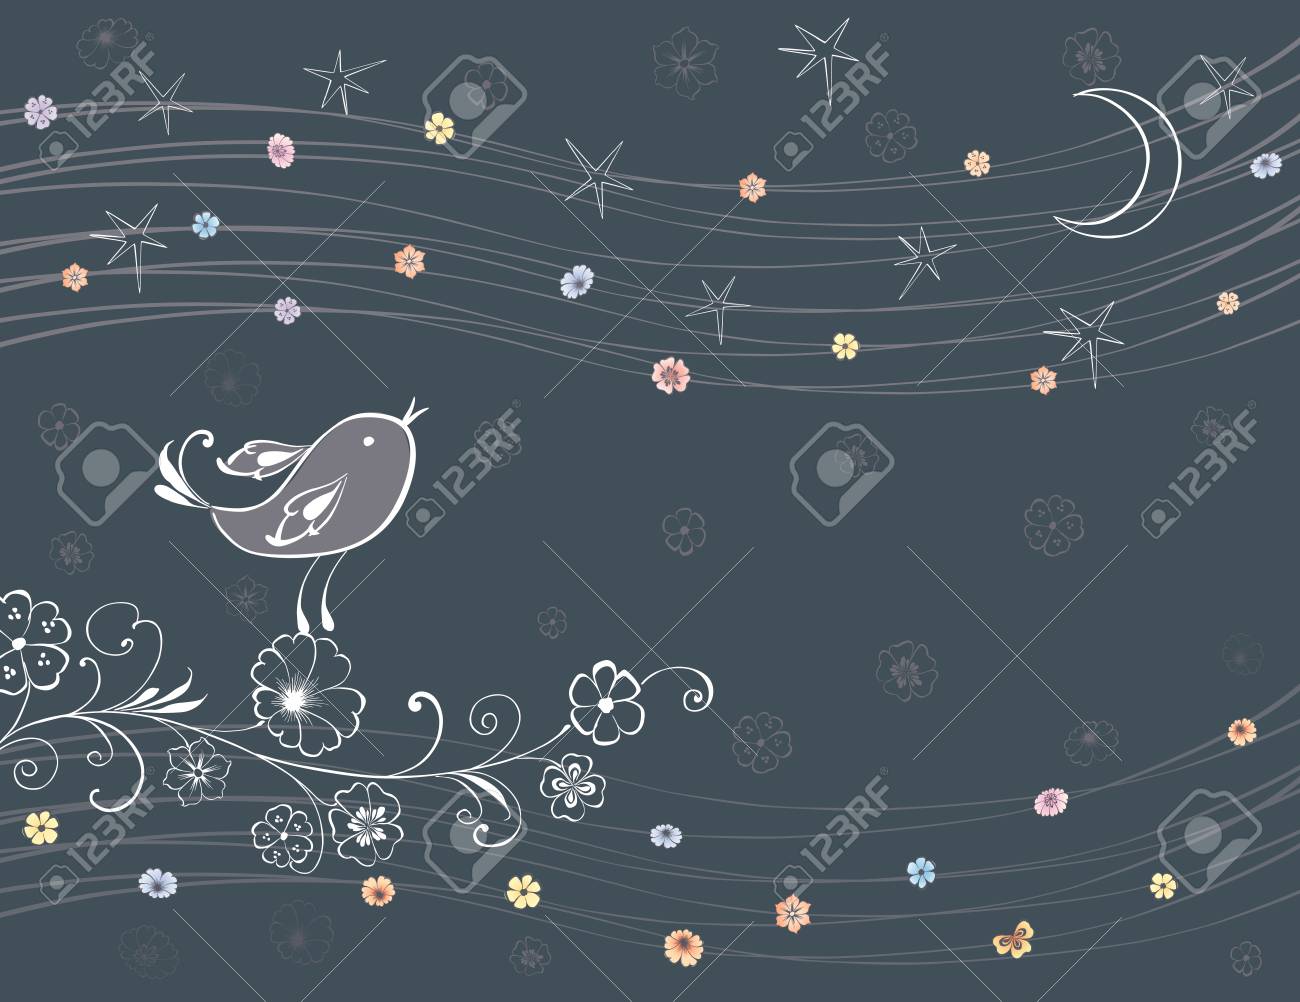 Vector Background With A Nightingale Singing In The Night Royalty